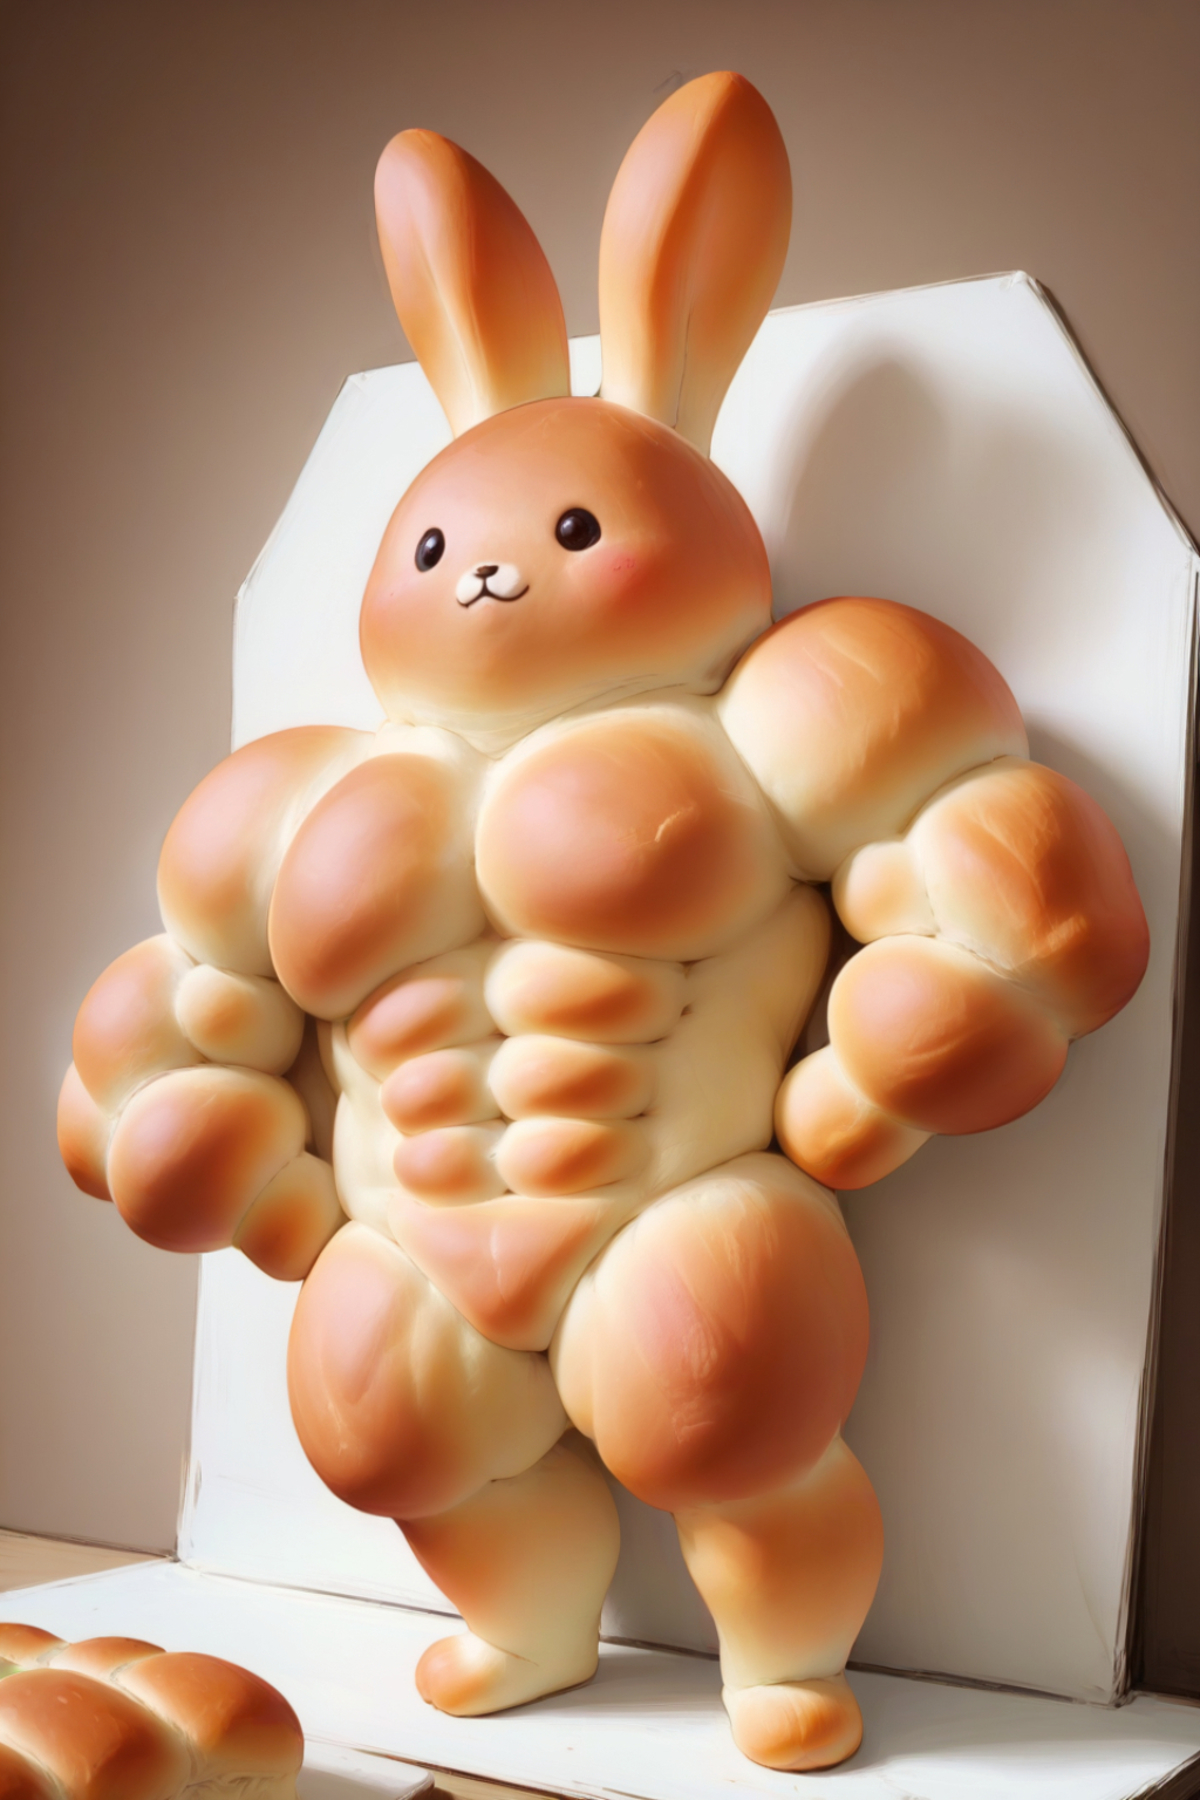 A Bunny Rabbit carved out of bread with muscles.